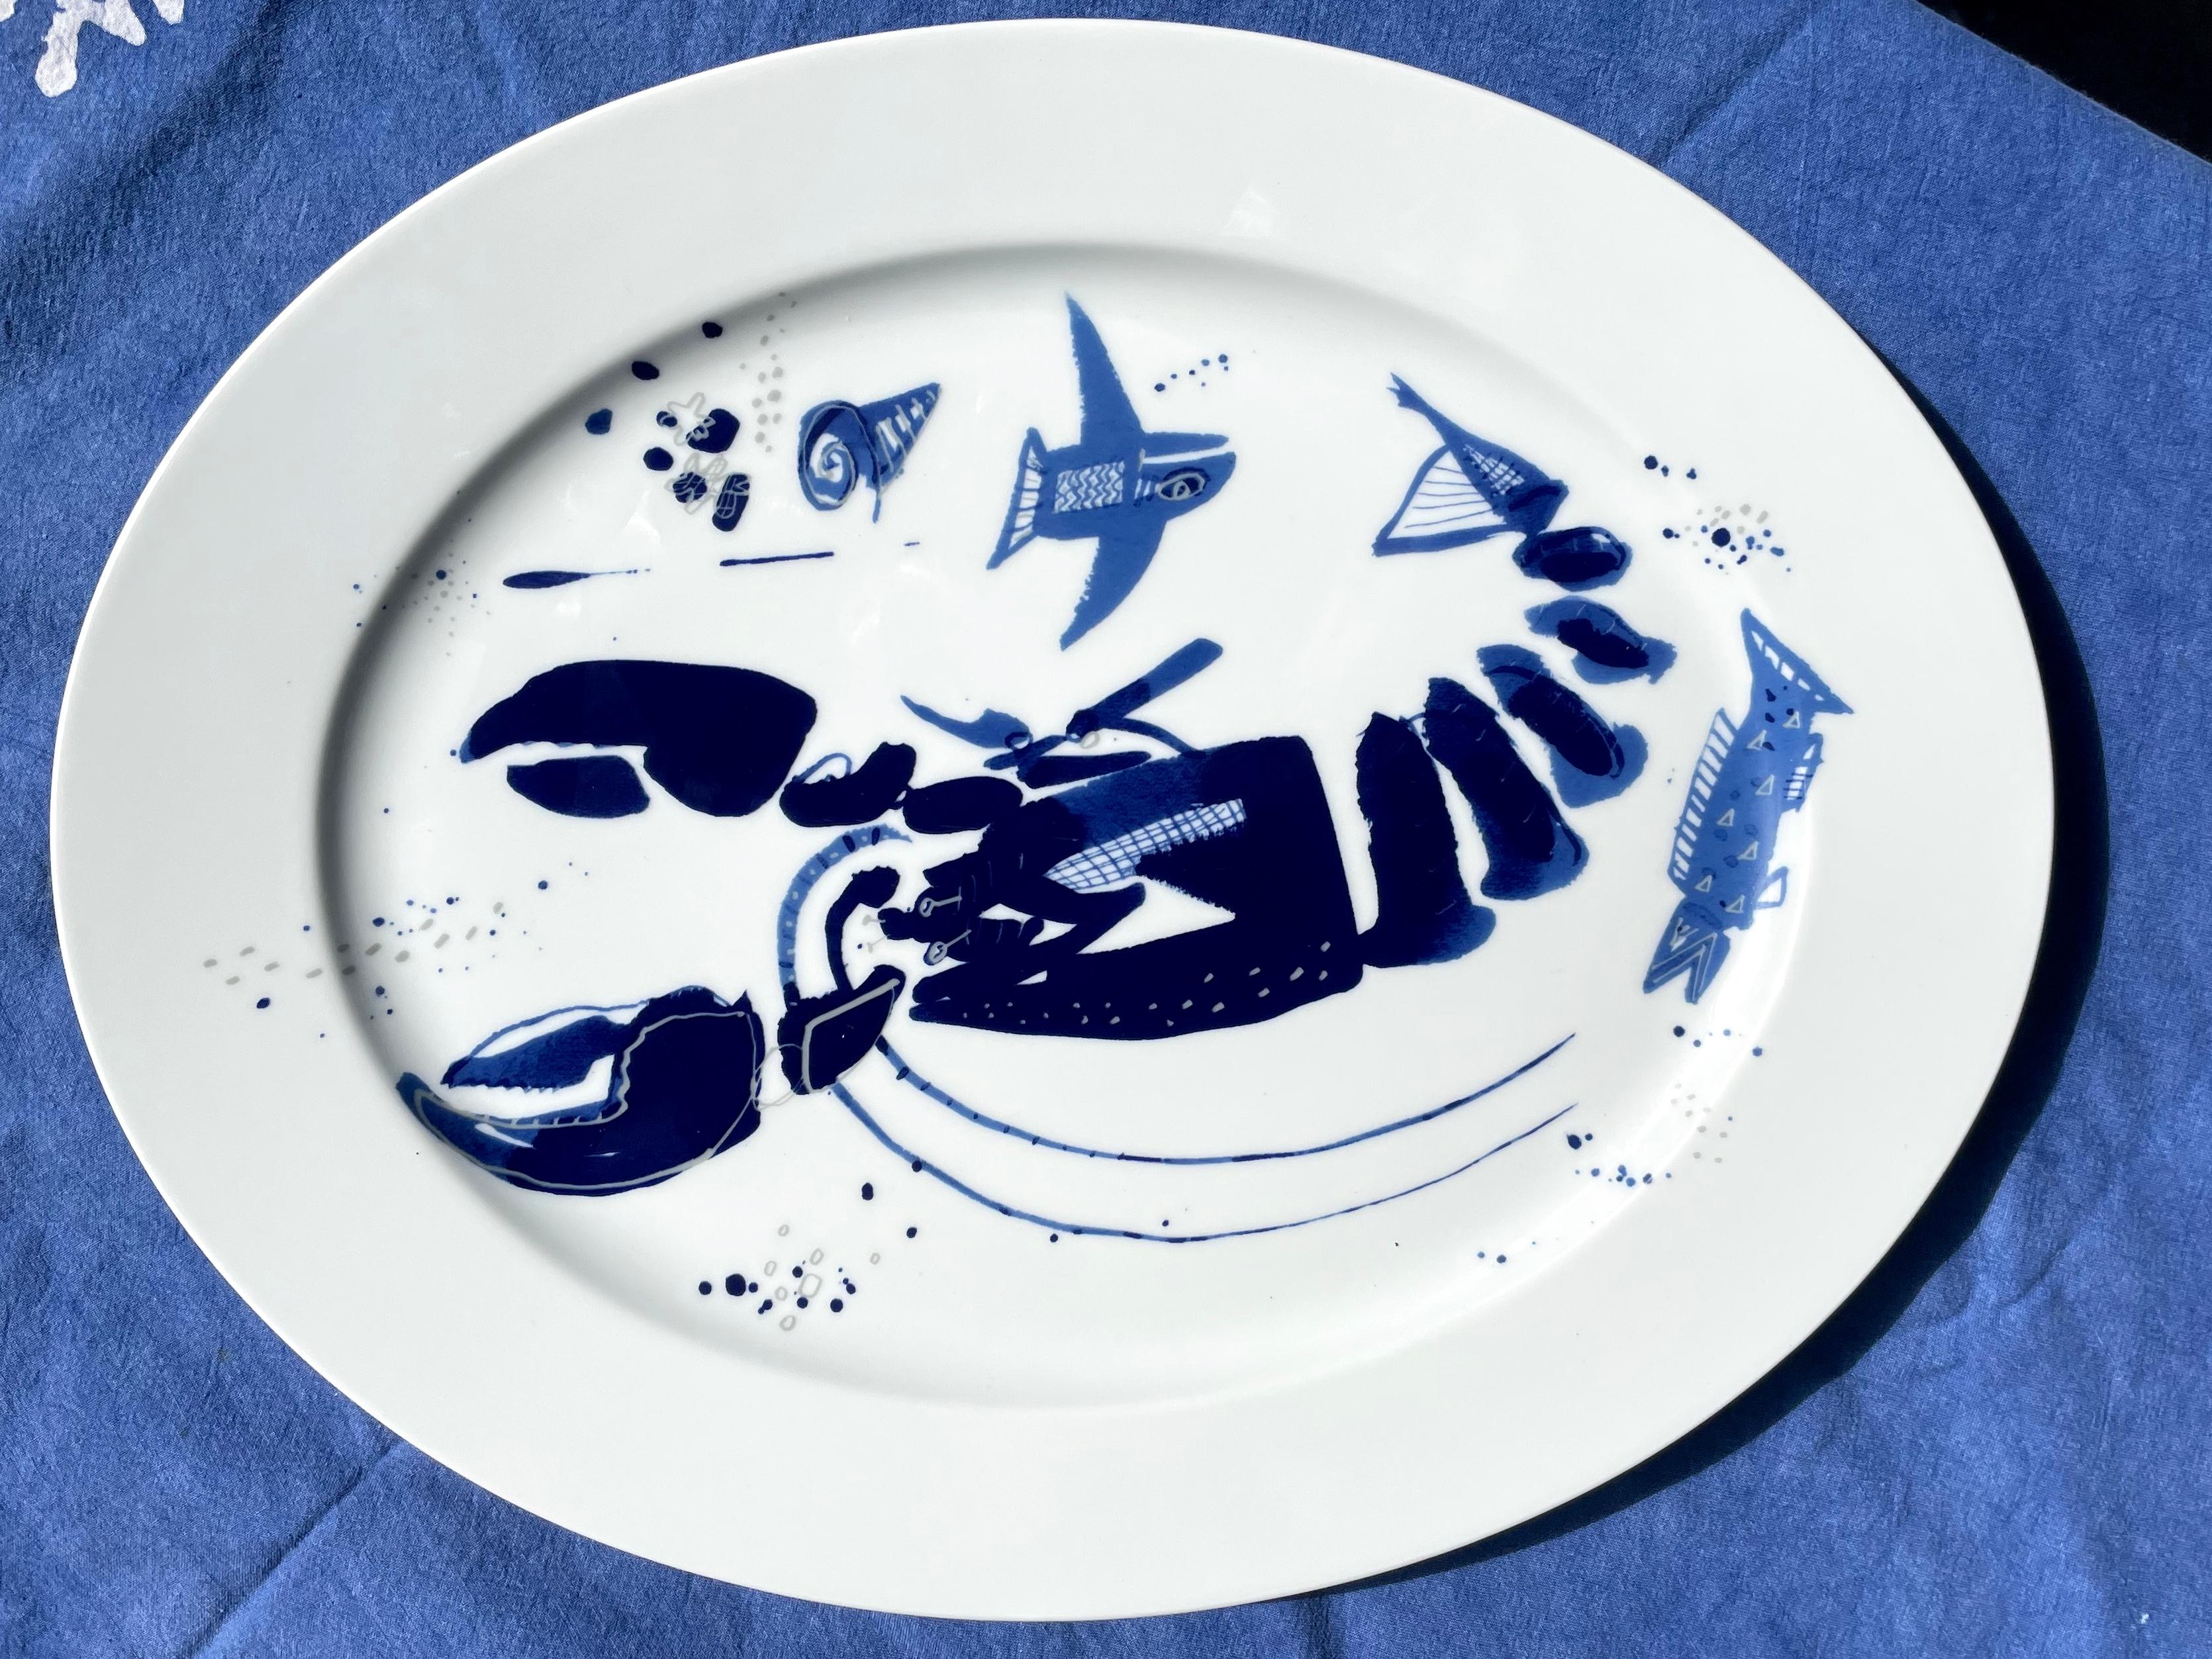 Blue and white lobster platter. Oval porcelain platter with lobster design in cobalt blue with white background with a fifties vintage feel. Germany, 21st century.
Dimensions: 14.5